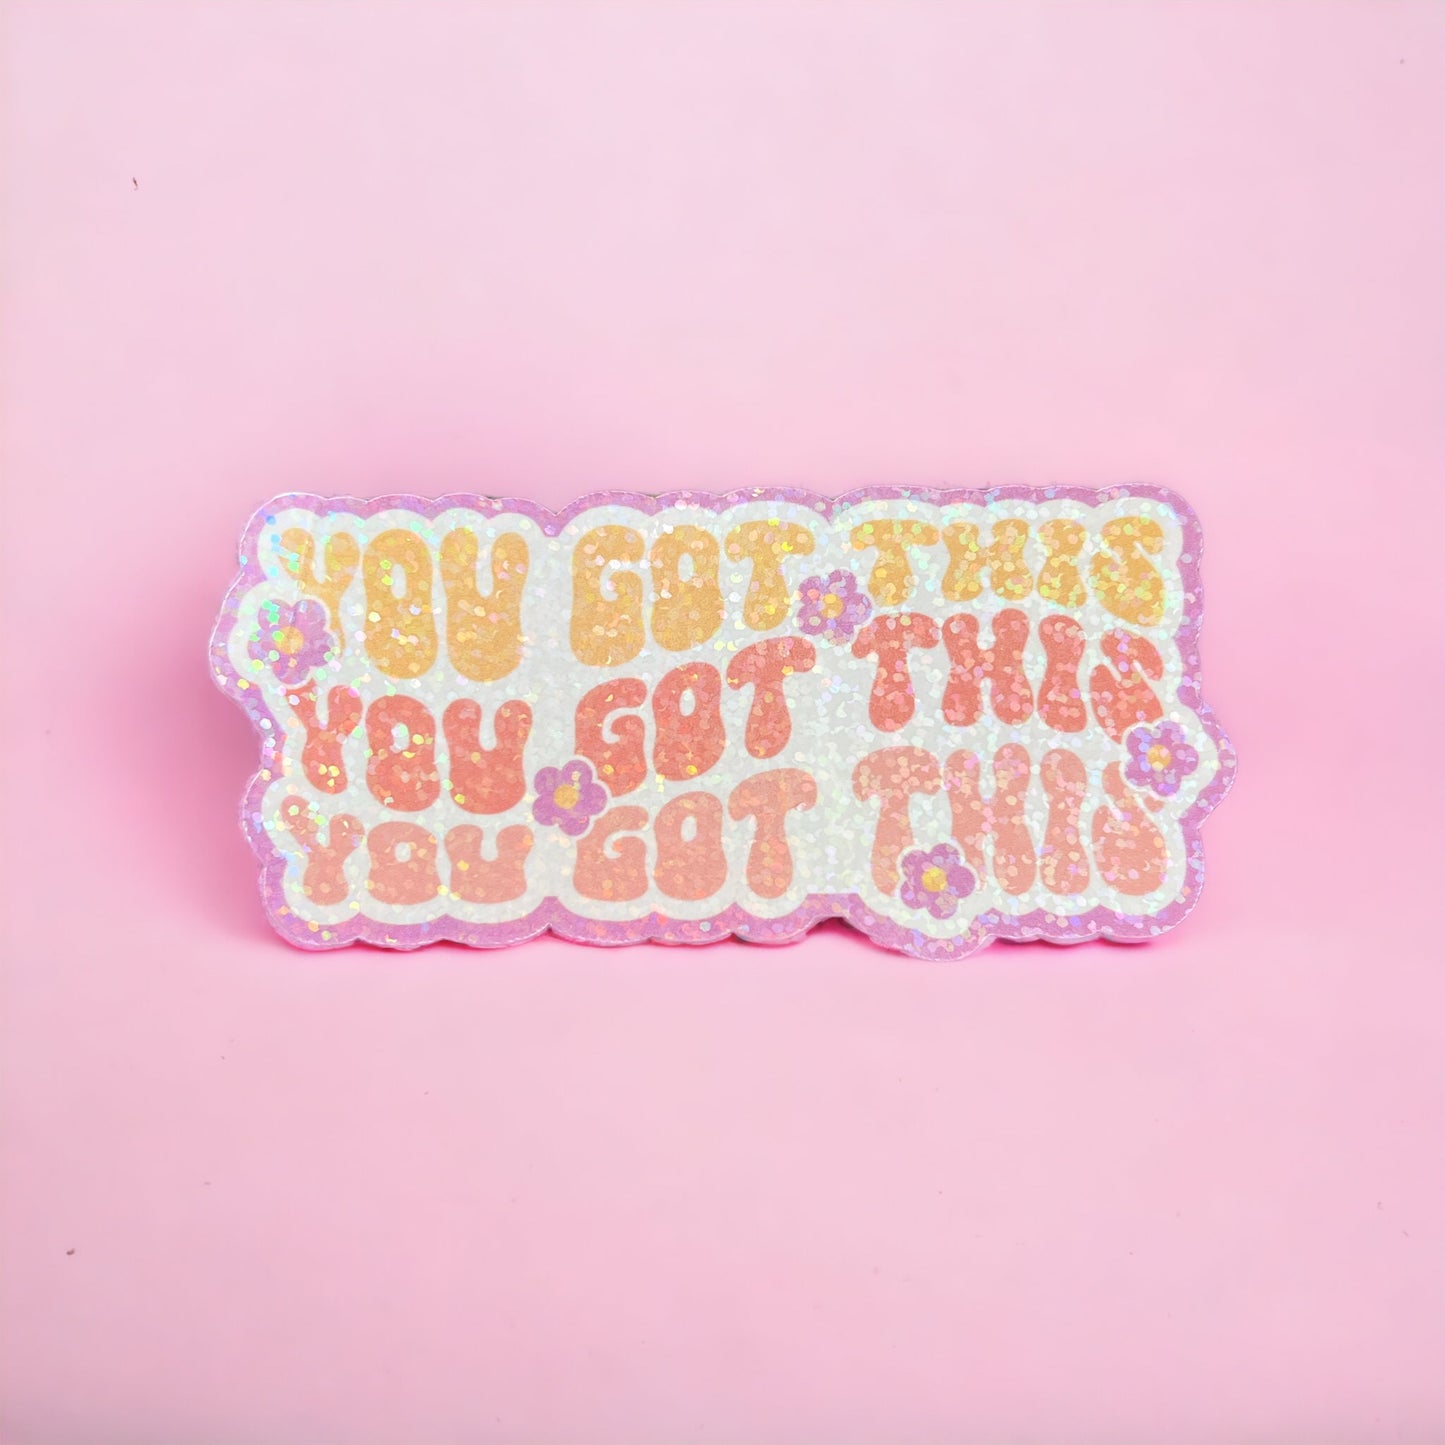 Motivational Holographic Sticker You Got This - Colorful and Inspiring Decal - Perfect for Laptops, Notebooks, and Personal Items